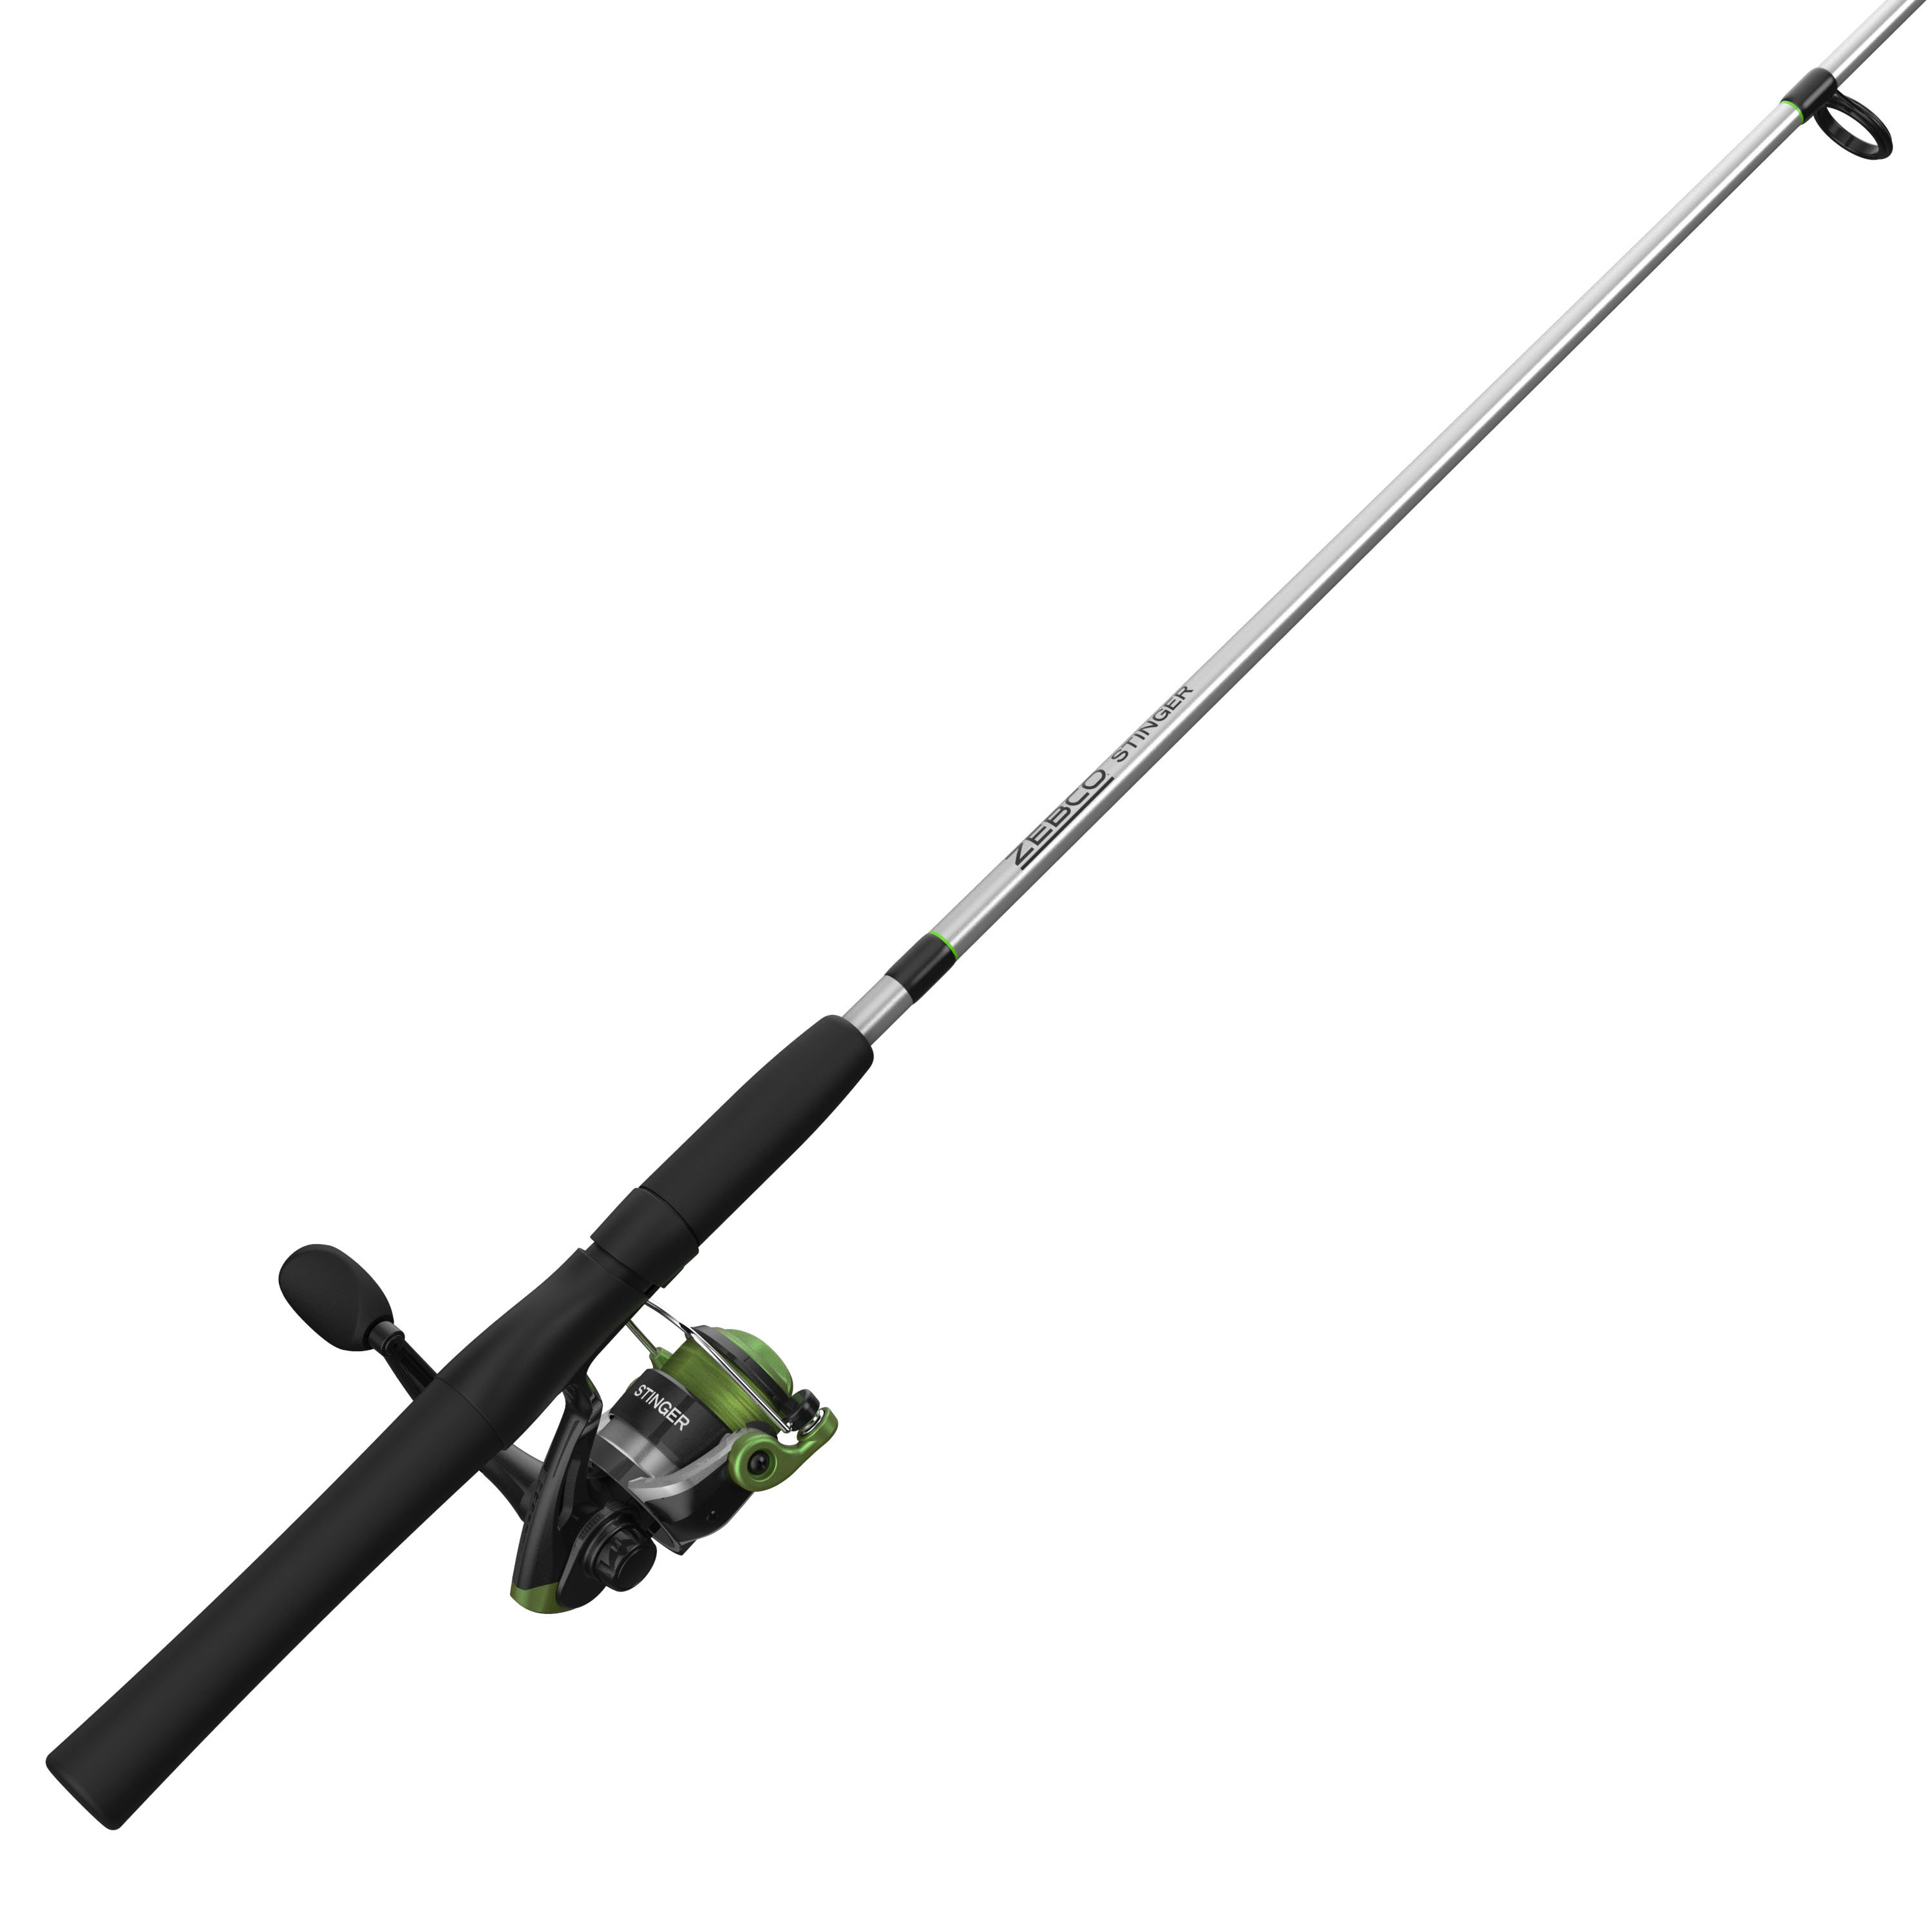 FISHING ROD AND REEL COMBO FISHING POLE 33 CAMO 6' SPINNING ROD LIGHT WEIGHT PRO 